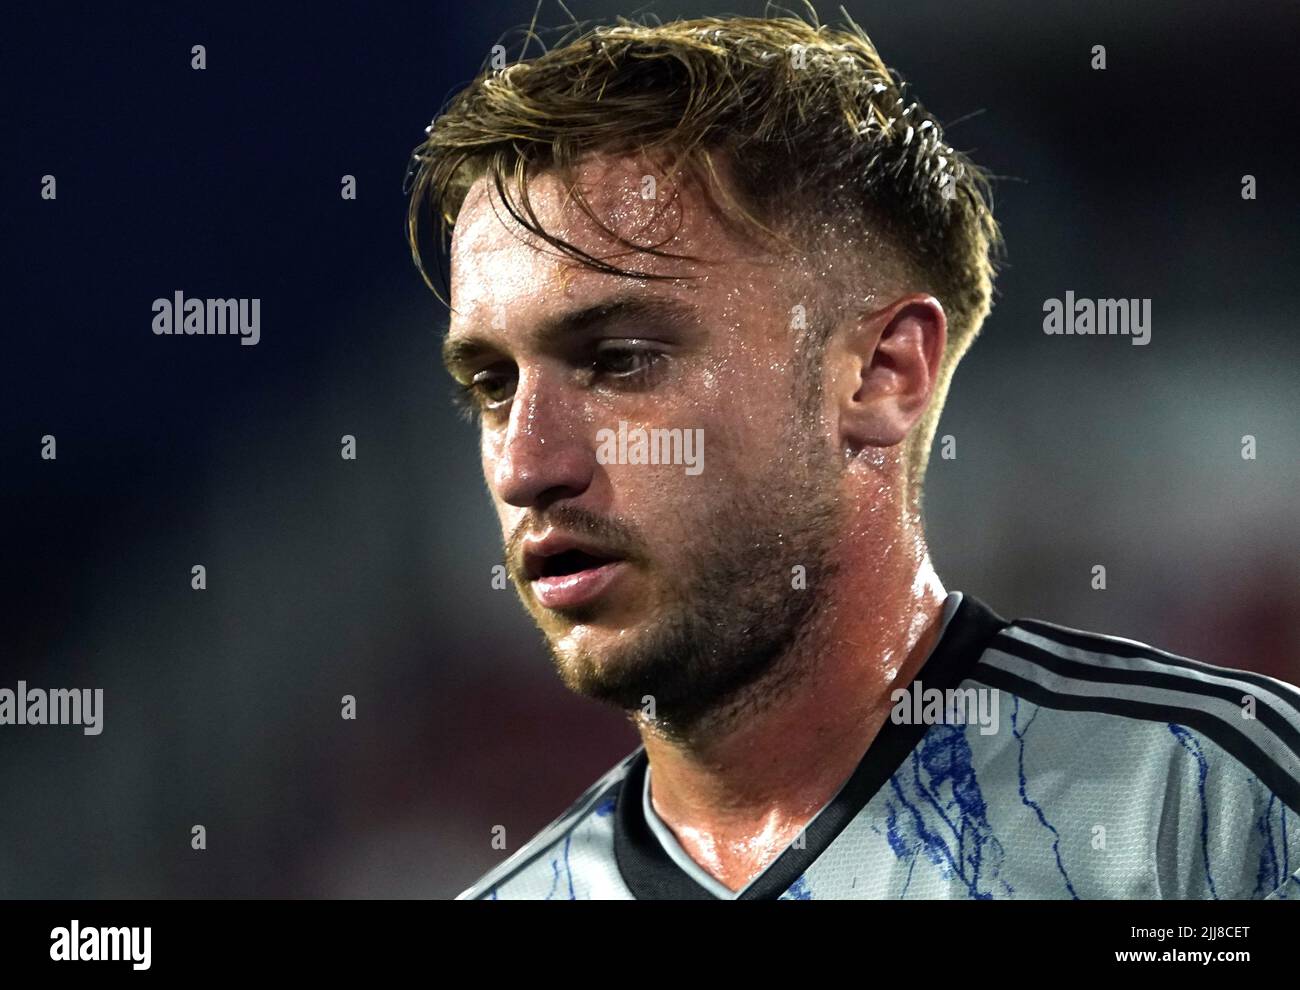 WASHINGTON, DC, USA - 23 JULY 2022: CF Montréal midfielder Djordje Mihailović (8) comes over to take a corner kick during a MLS match between D.C United and C.F. Montreal, on July 23, 2022, at Audi Field, in Washington, DC. (Photo by Tony Quinn-Alamy Live News) Stock Photo